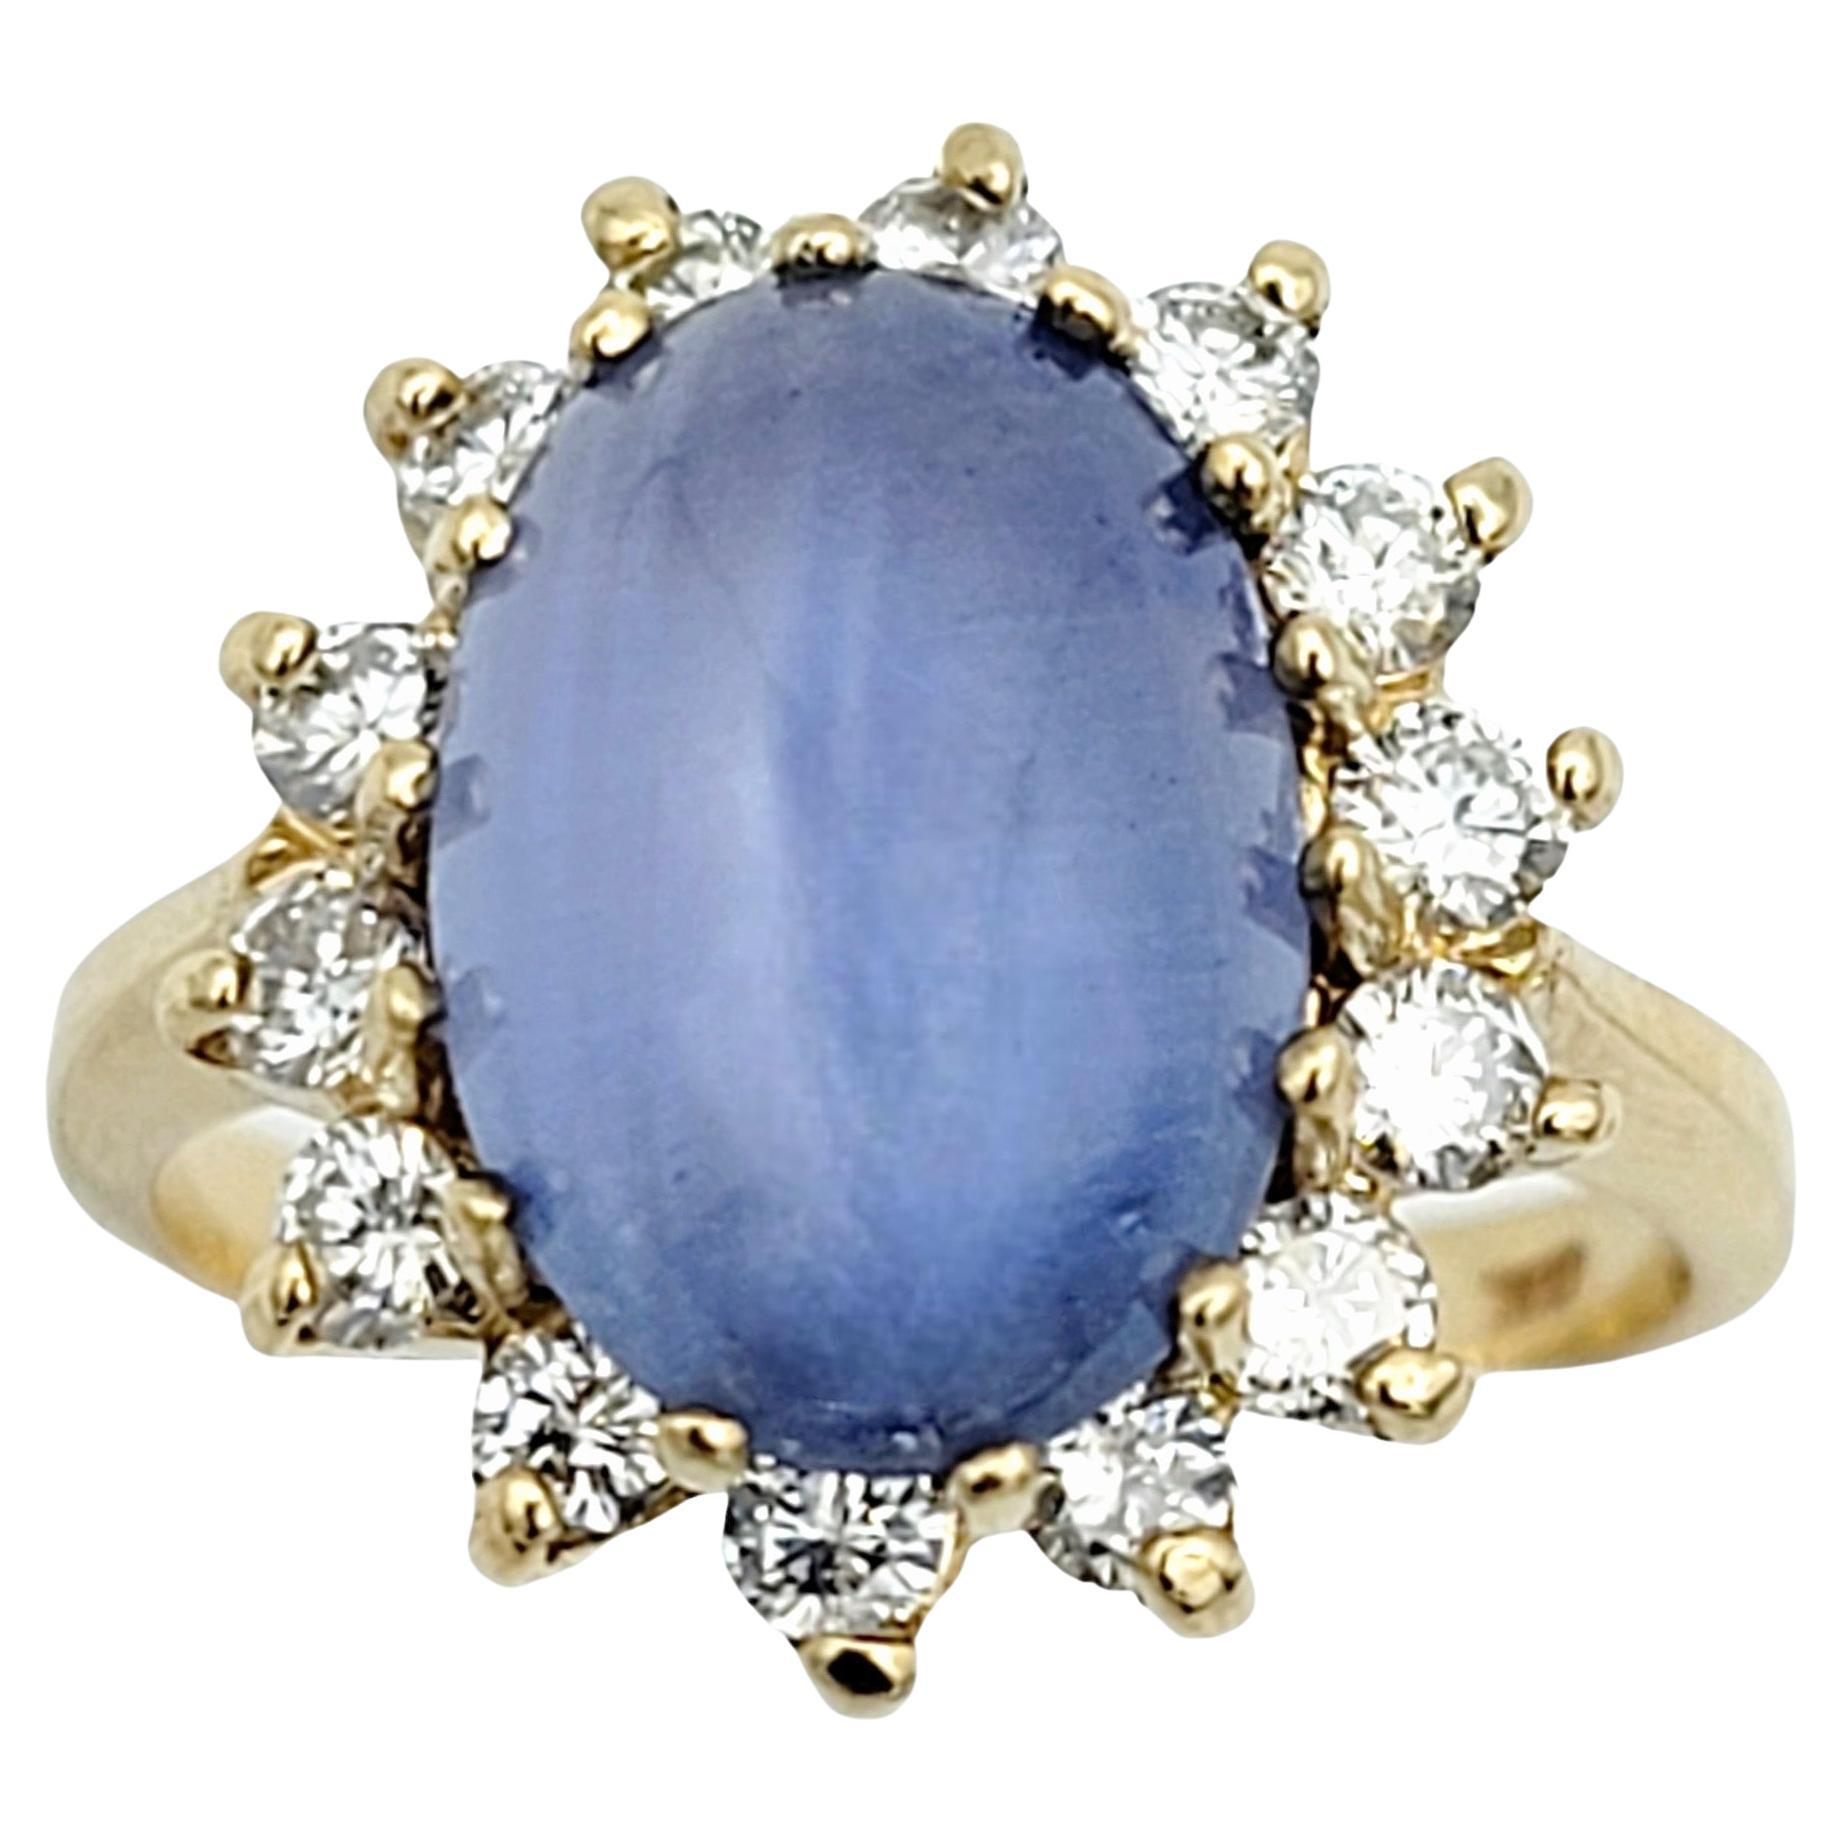 Cabochon Sapphire and Diamond Halo Cocktail Ring in 14 Karat Yellow Gold